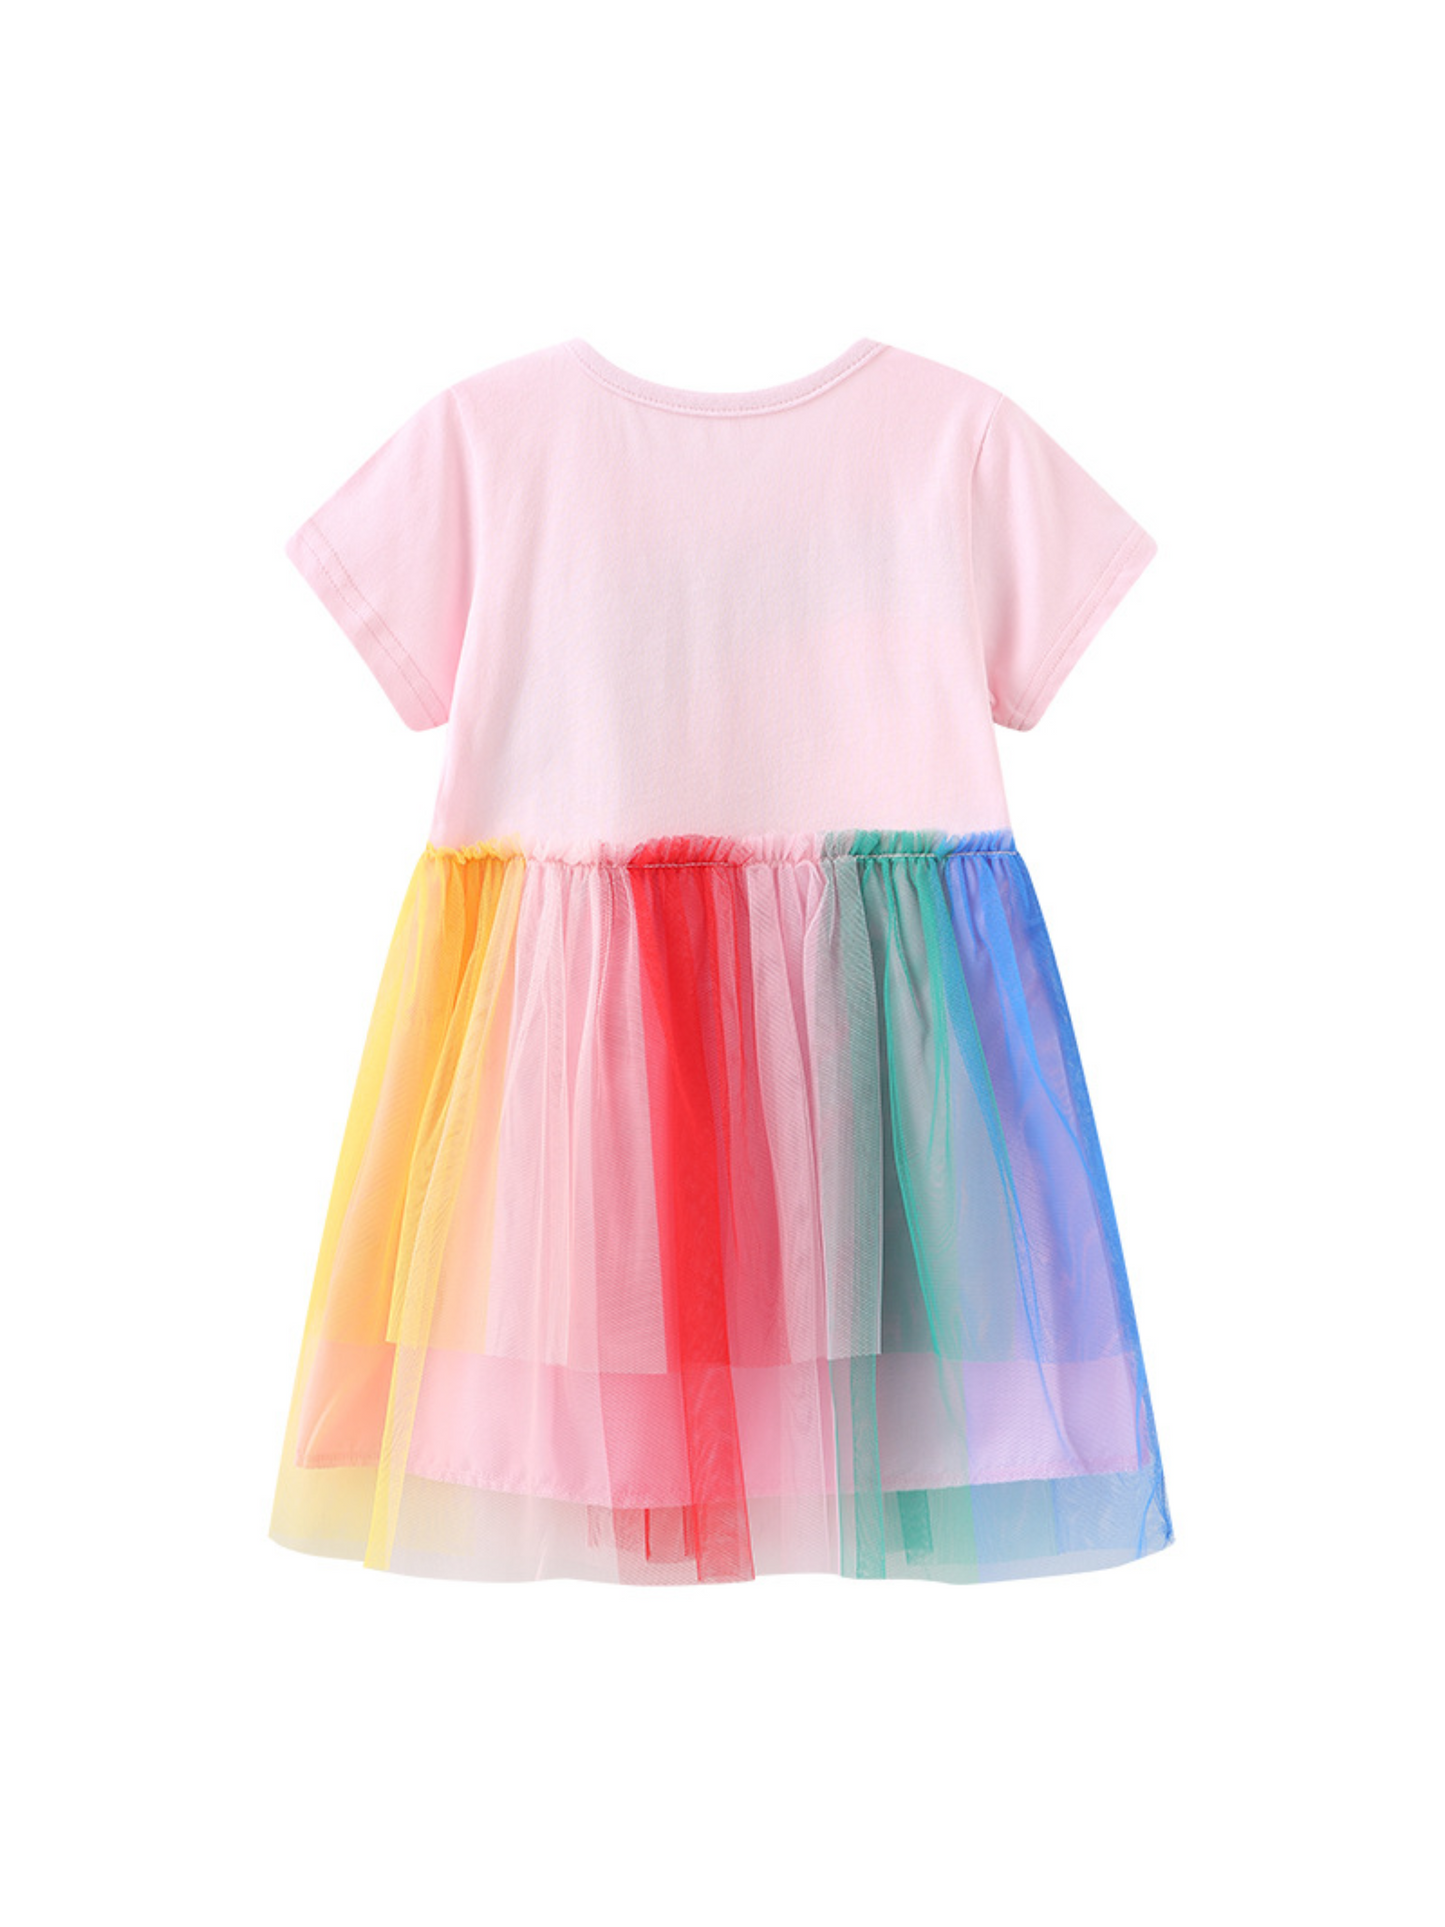 Rainbow Tutu Dress (Size 2 & 3 years old ONLY)